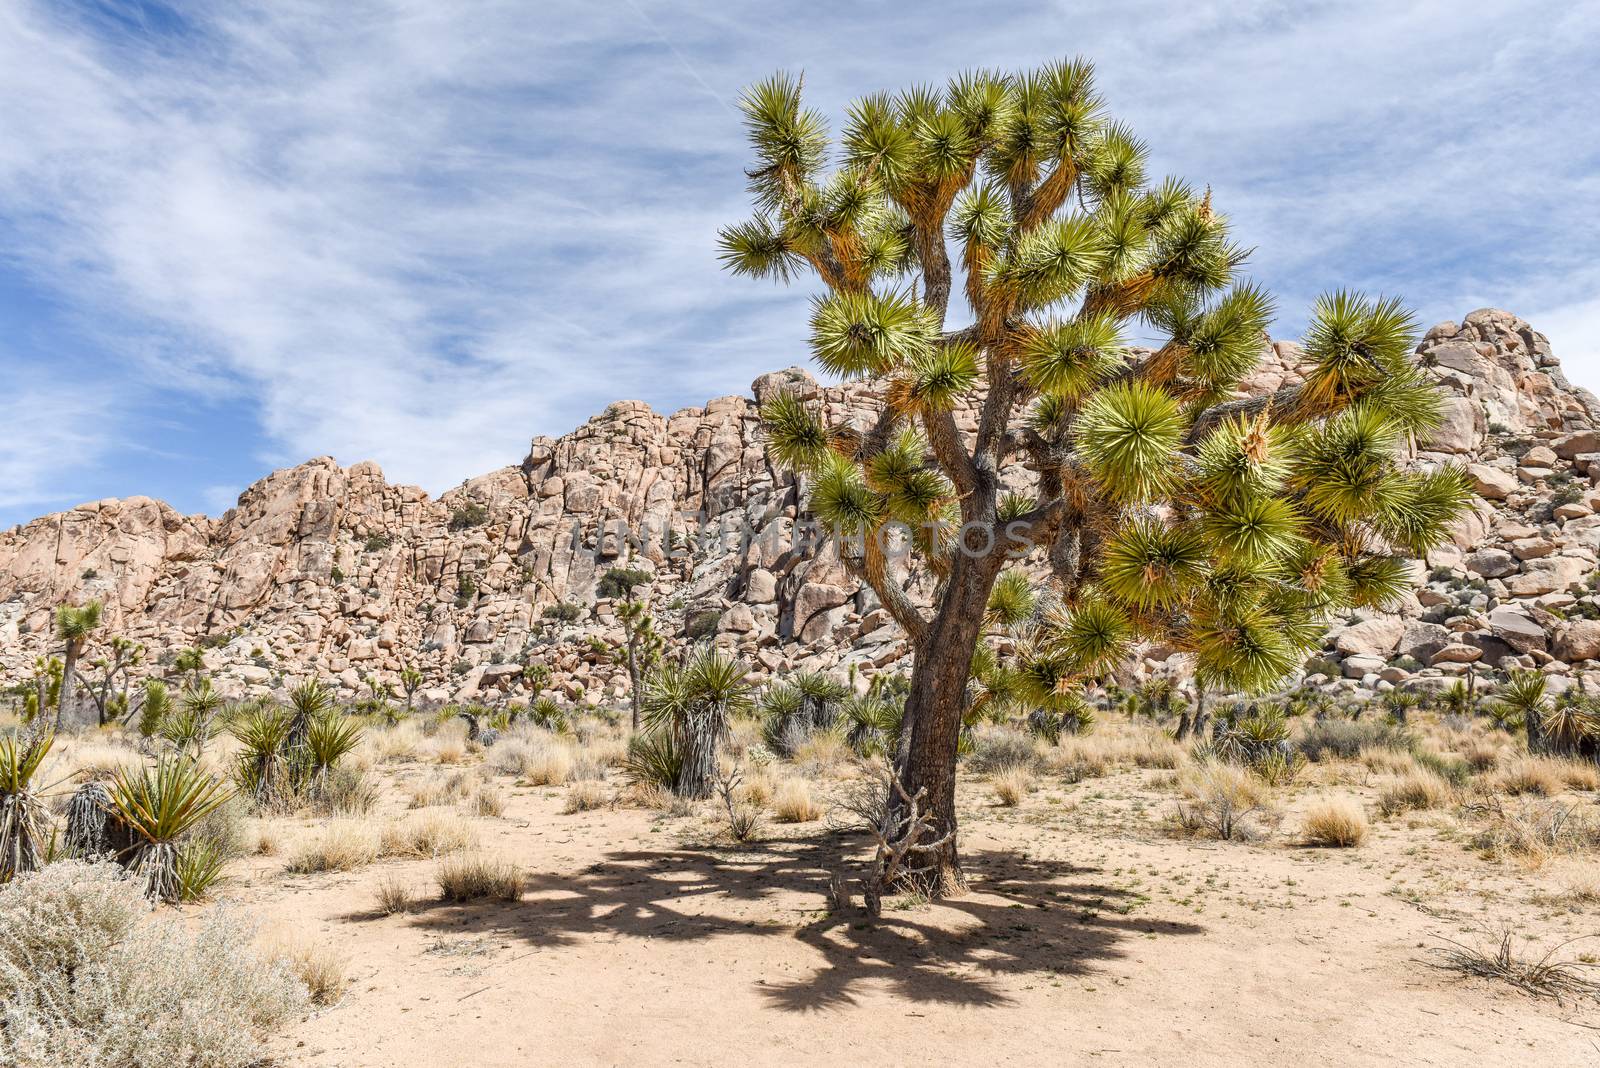 Joshua trees (Yucca brevifolia) on Boy Scout Trail in Joshua Tre by Njean